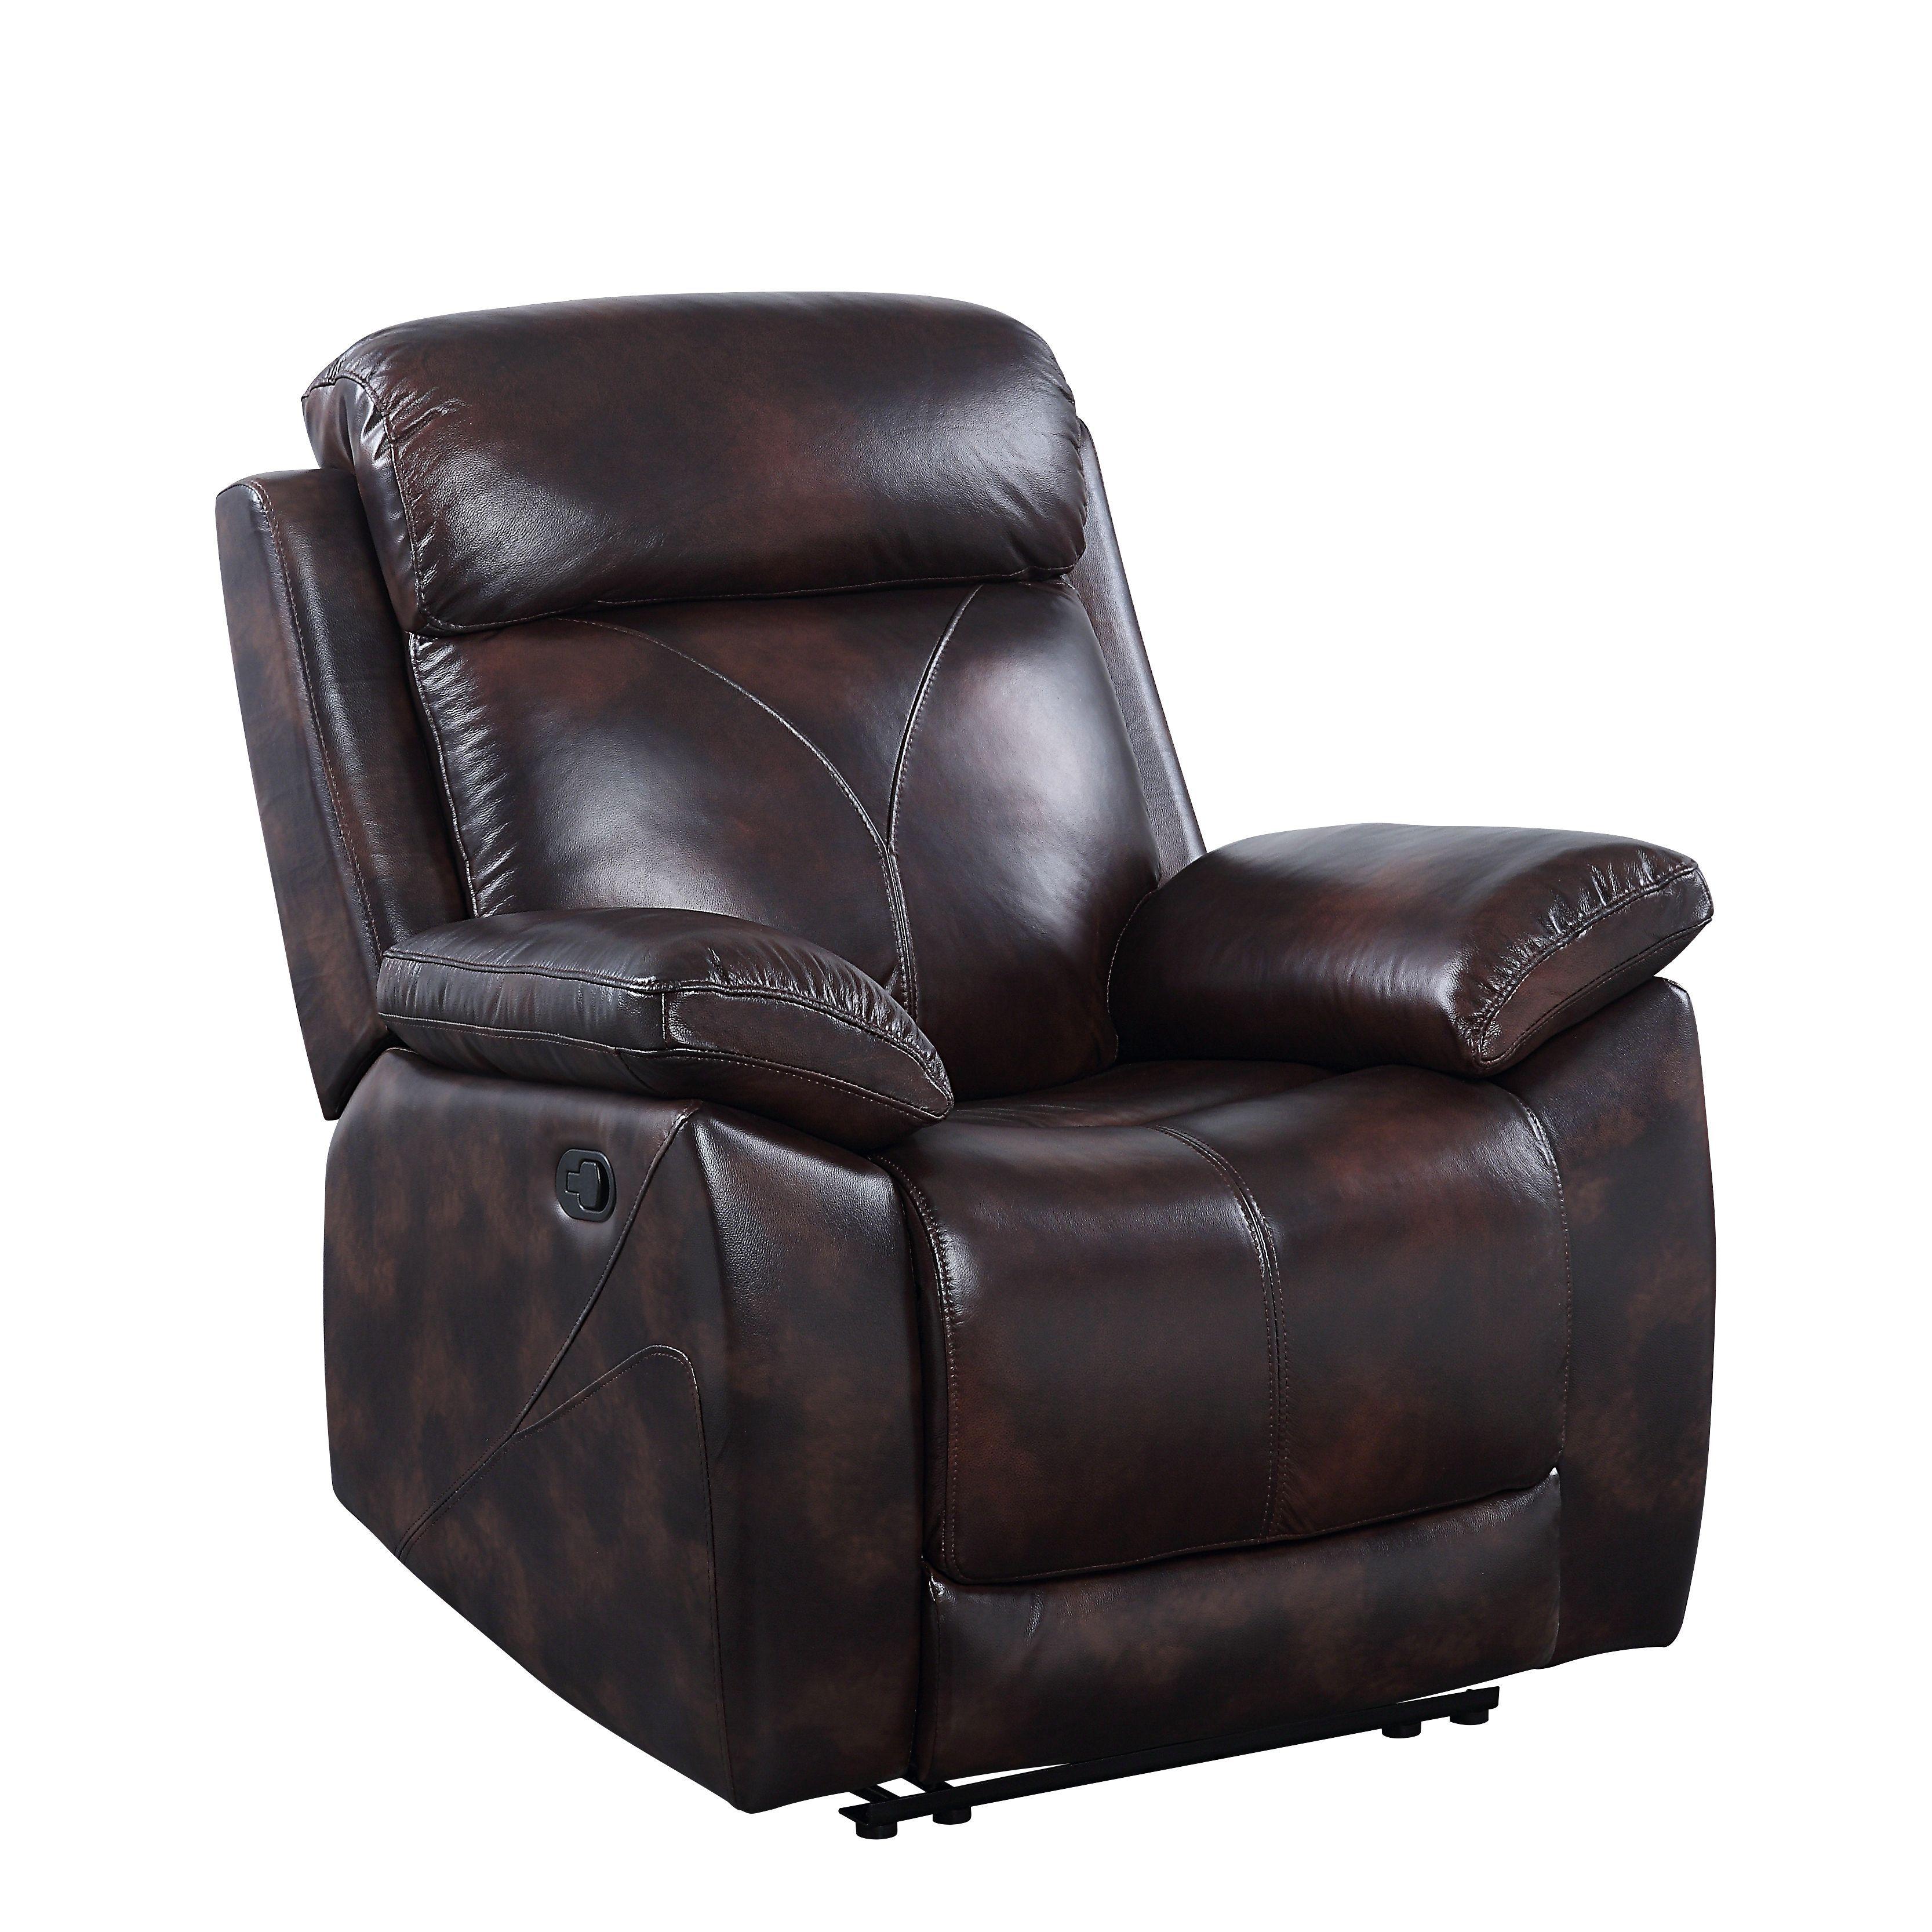 

    
LV00066-3pcs Contemporary Dark Brown Leather Sofa + Loveseat + Recliner by Acme Perfiel LV00066-3pcs
